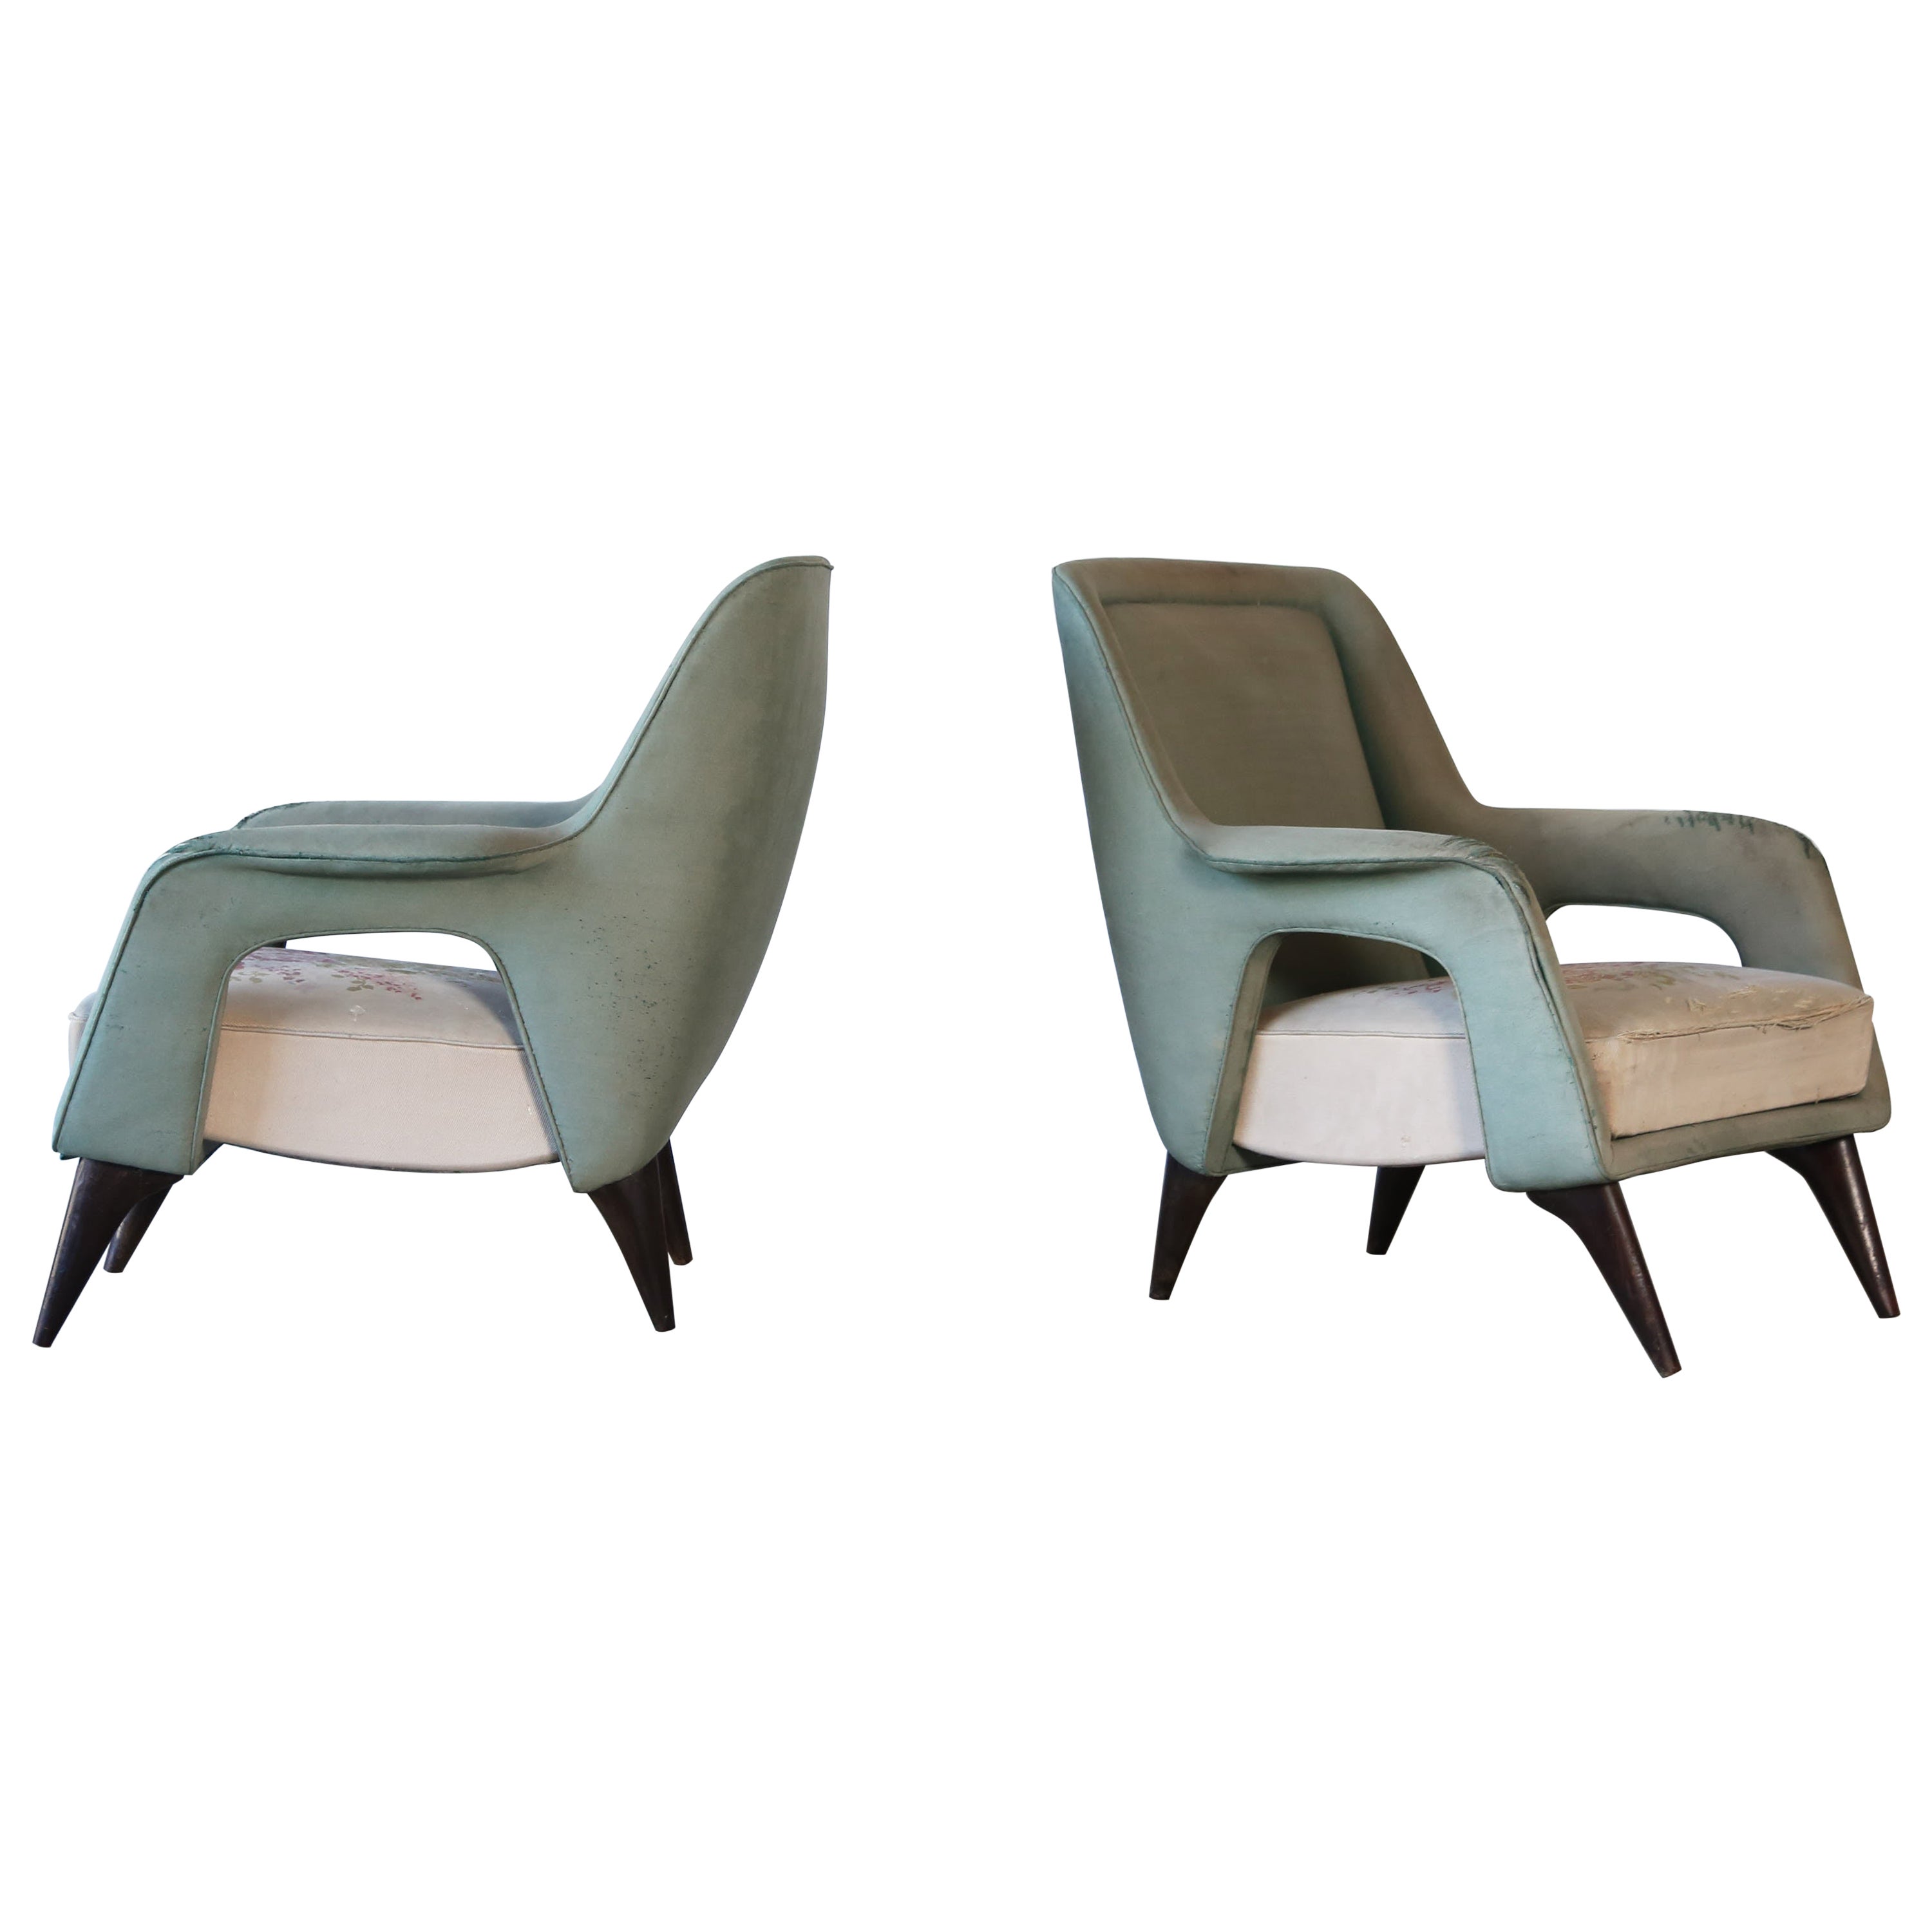 Outstanding, Rare Lounge Chairs, Italy, 1950s, For Reupholstery For Sale